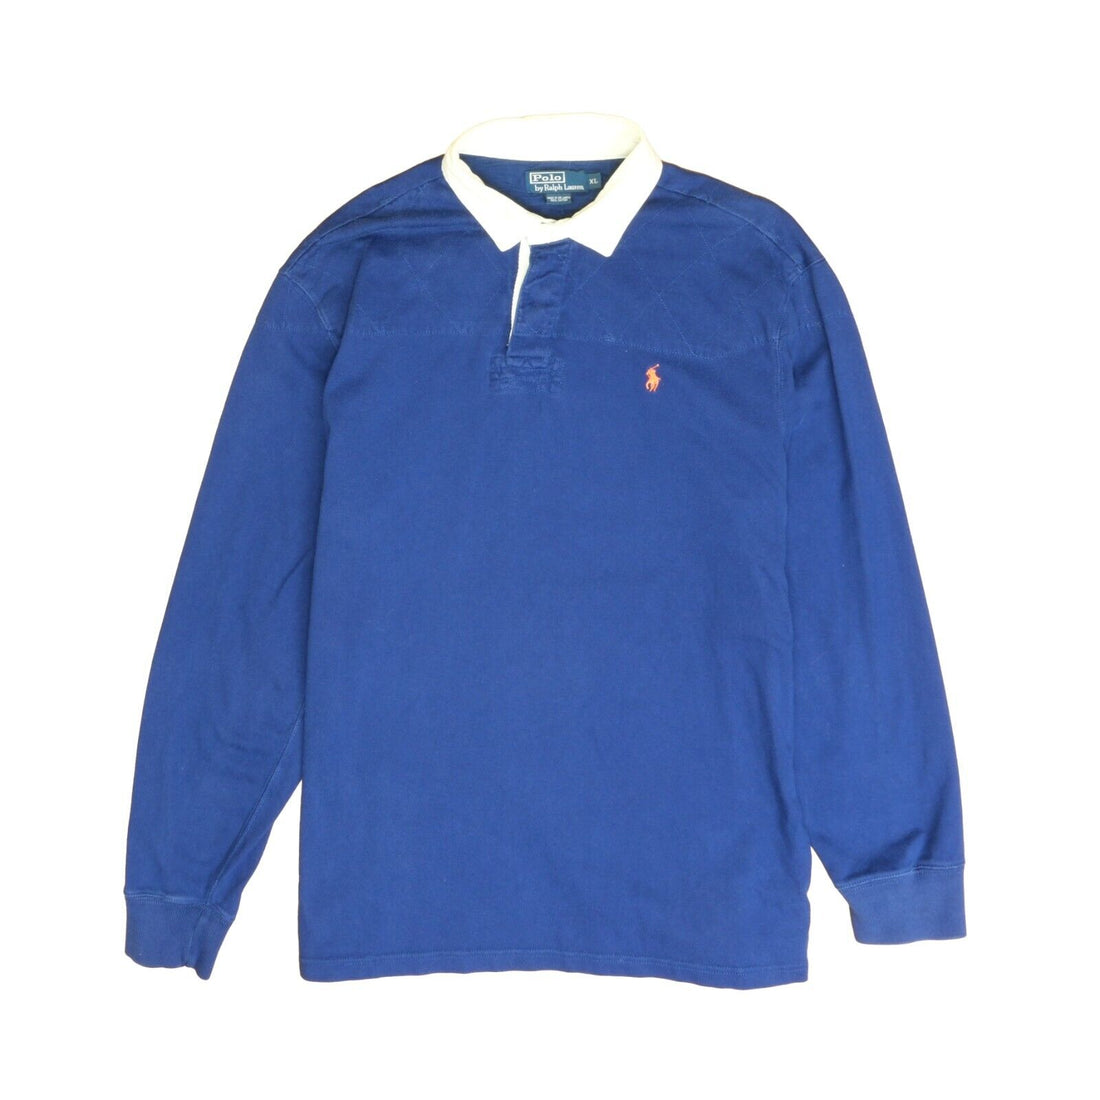 Vintage Polo Ralph Lauren Rugby Shirt Size XL Long Sleeve Blue